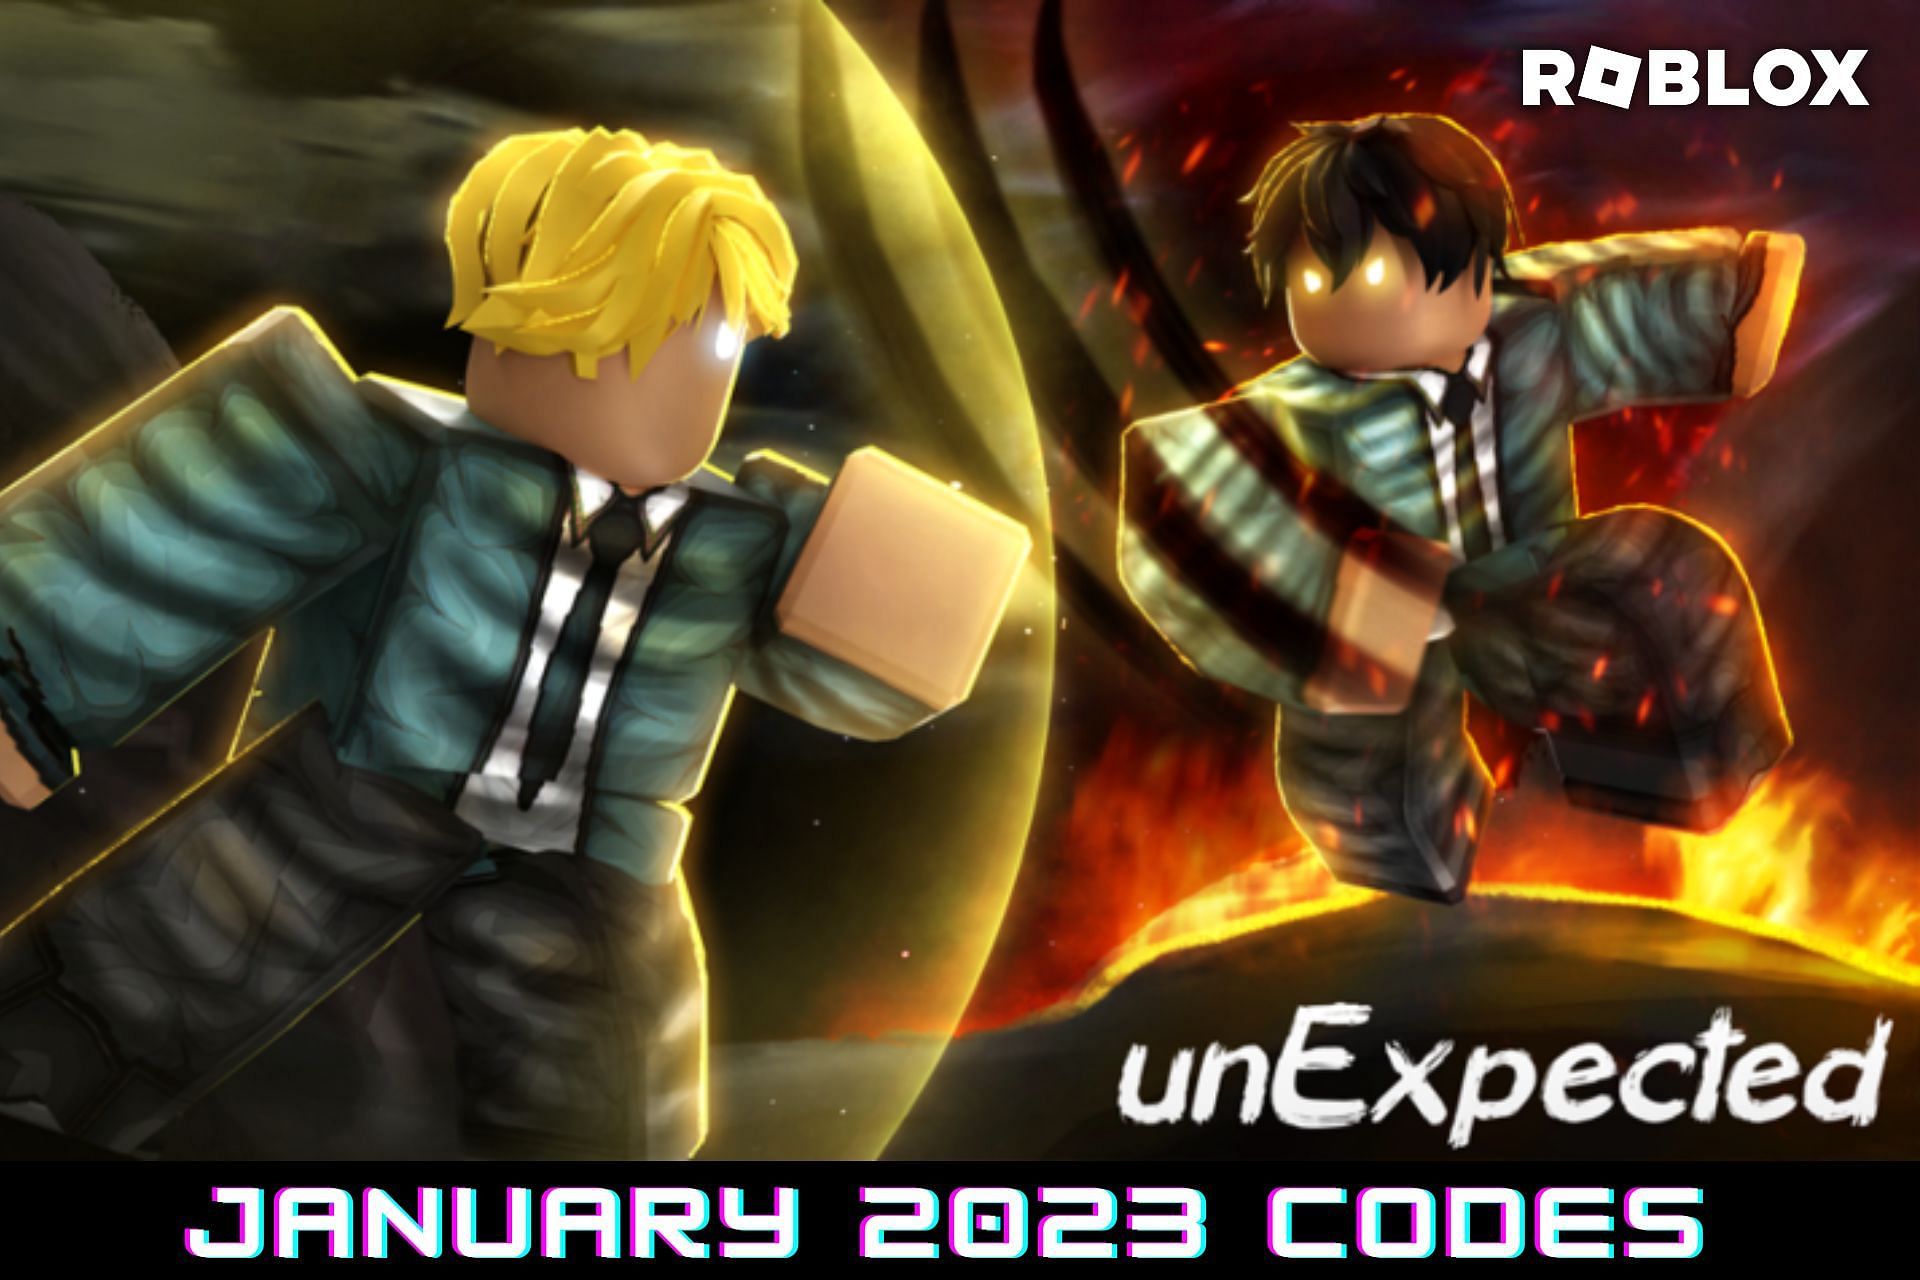 Roblox unExpected codes for January 2023: Free cash